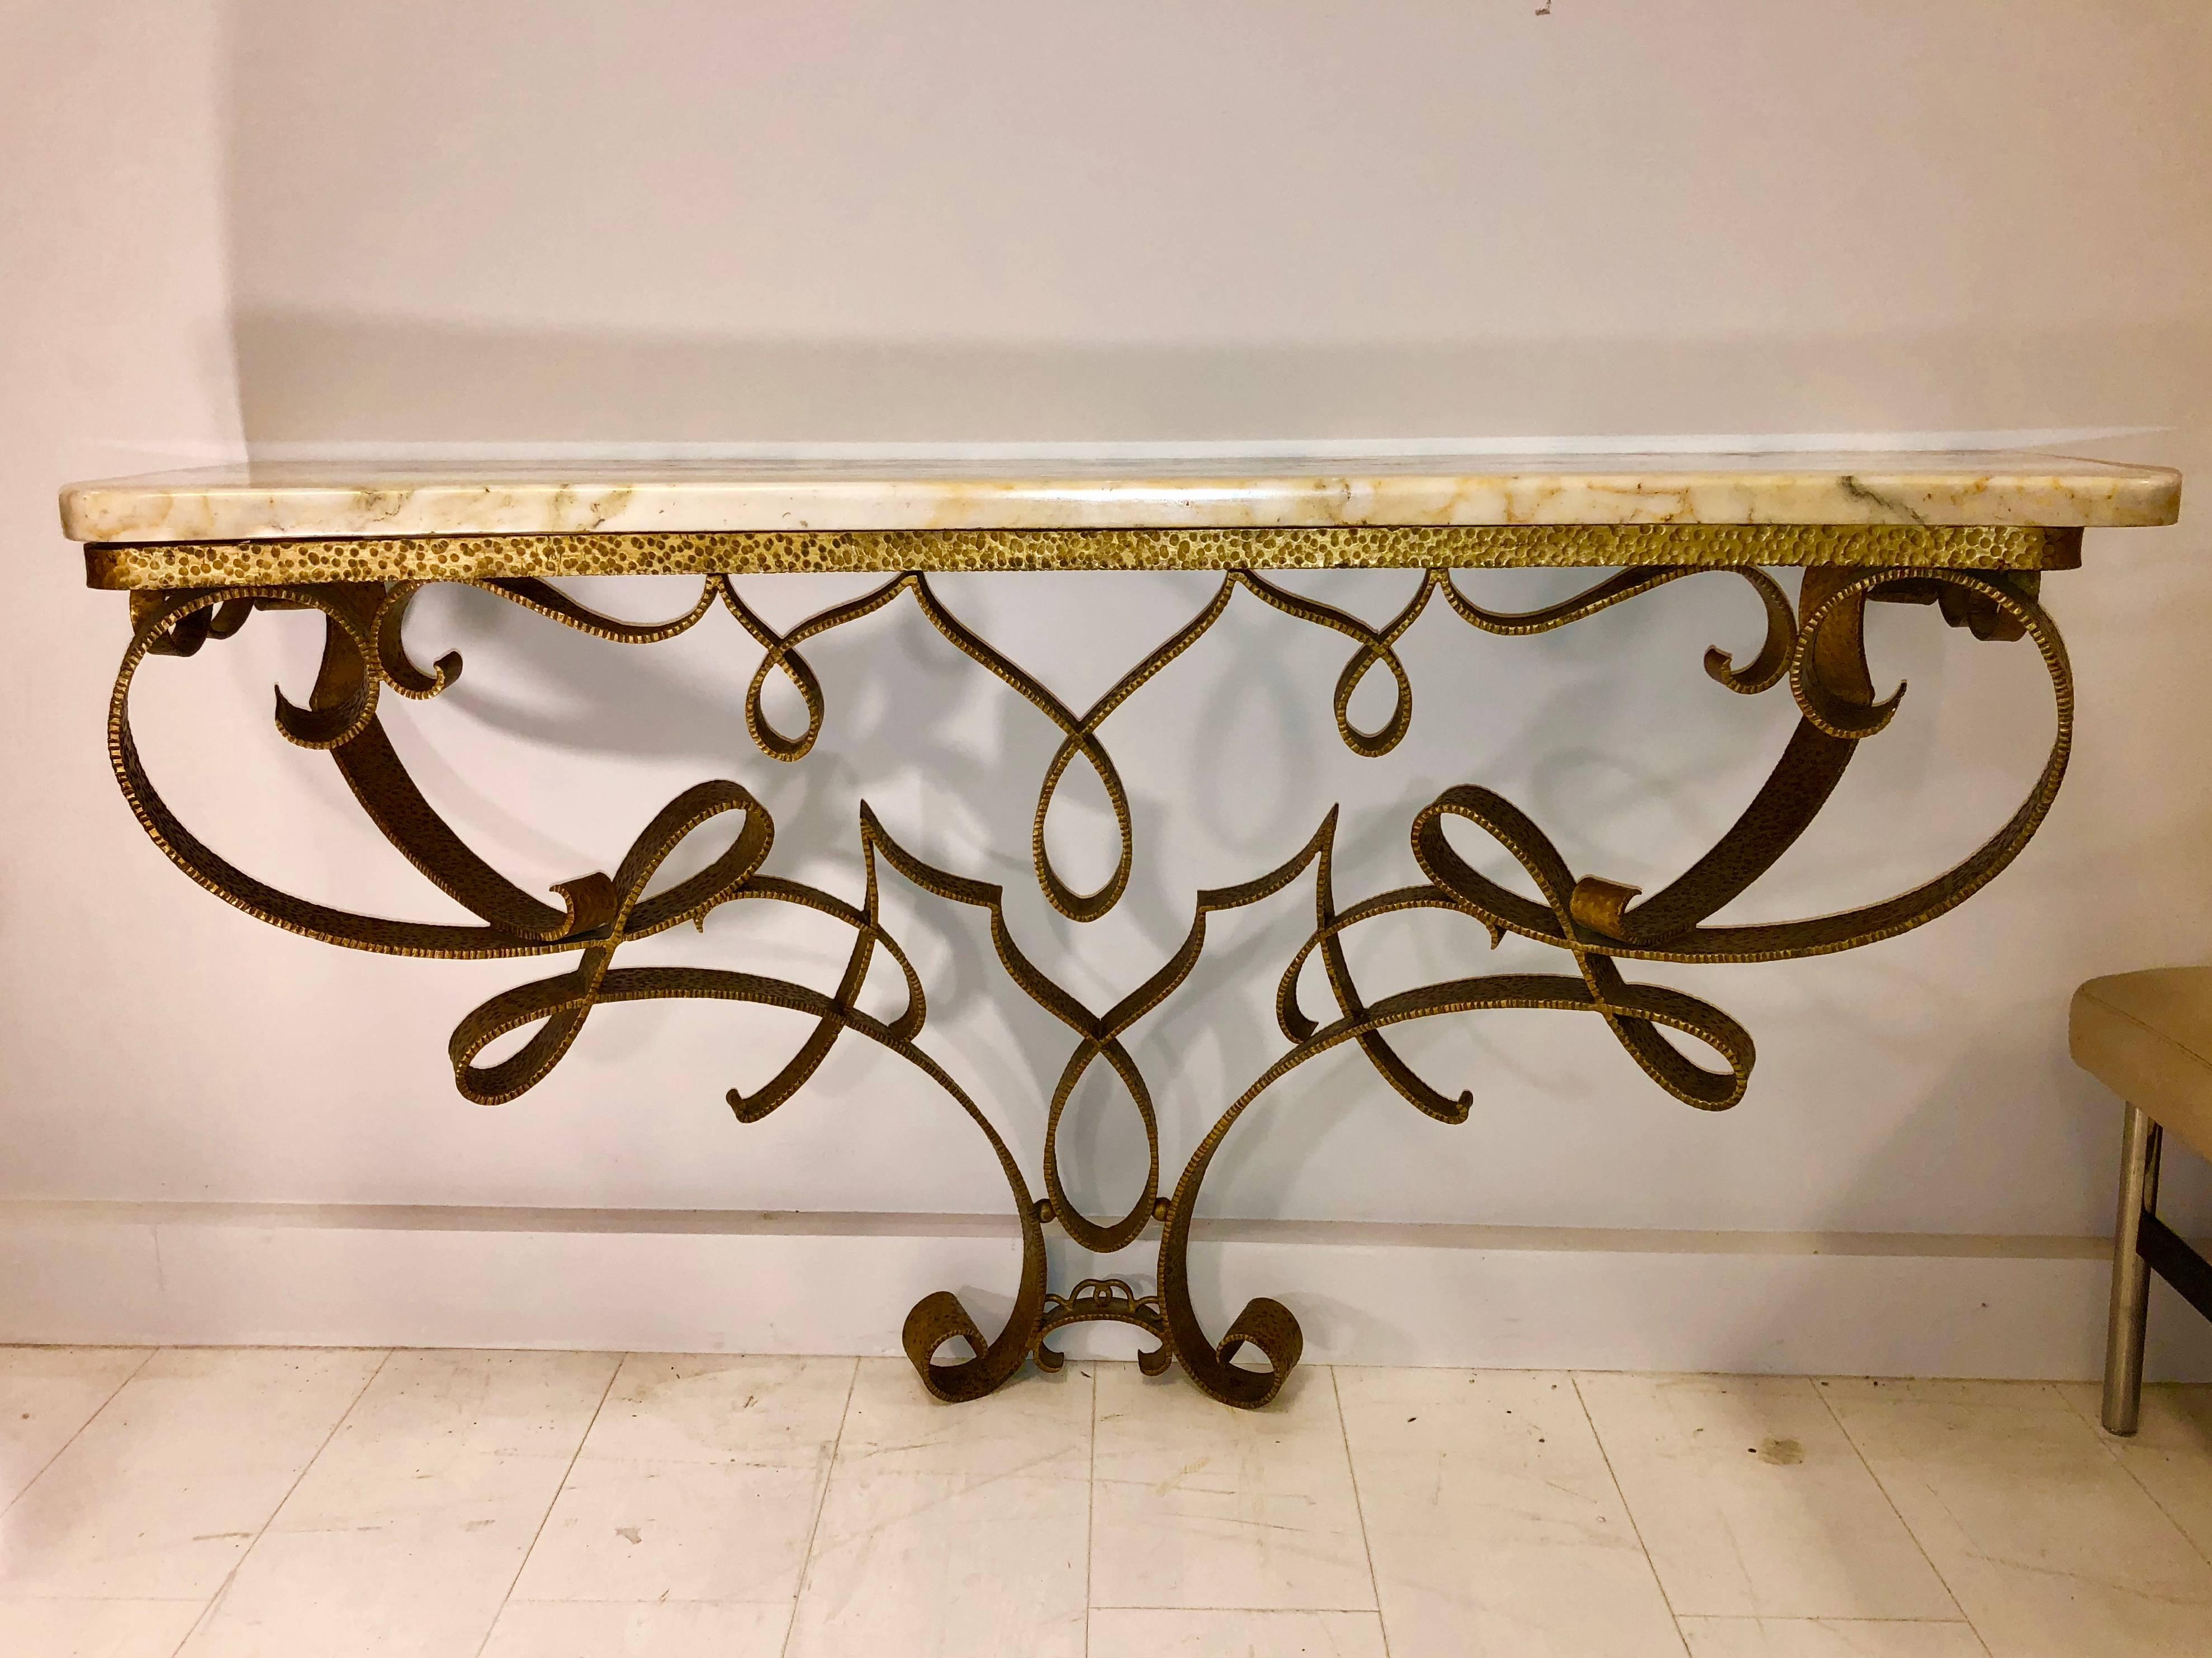 Hand-chaised and gilded ironwork in a flamboyantly elegant ribbon design, with breche Violette marble-top.